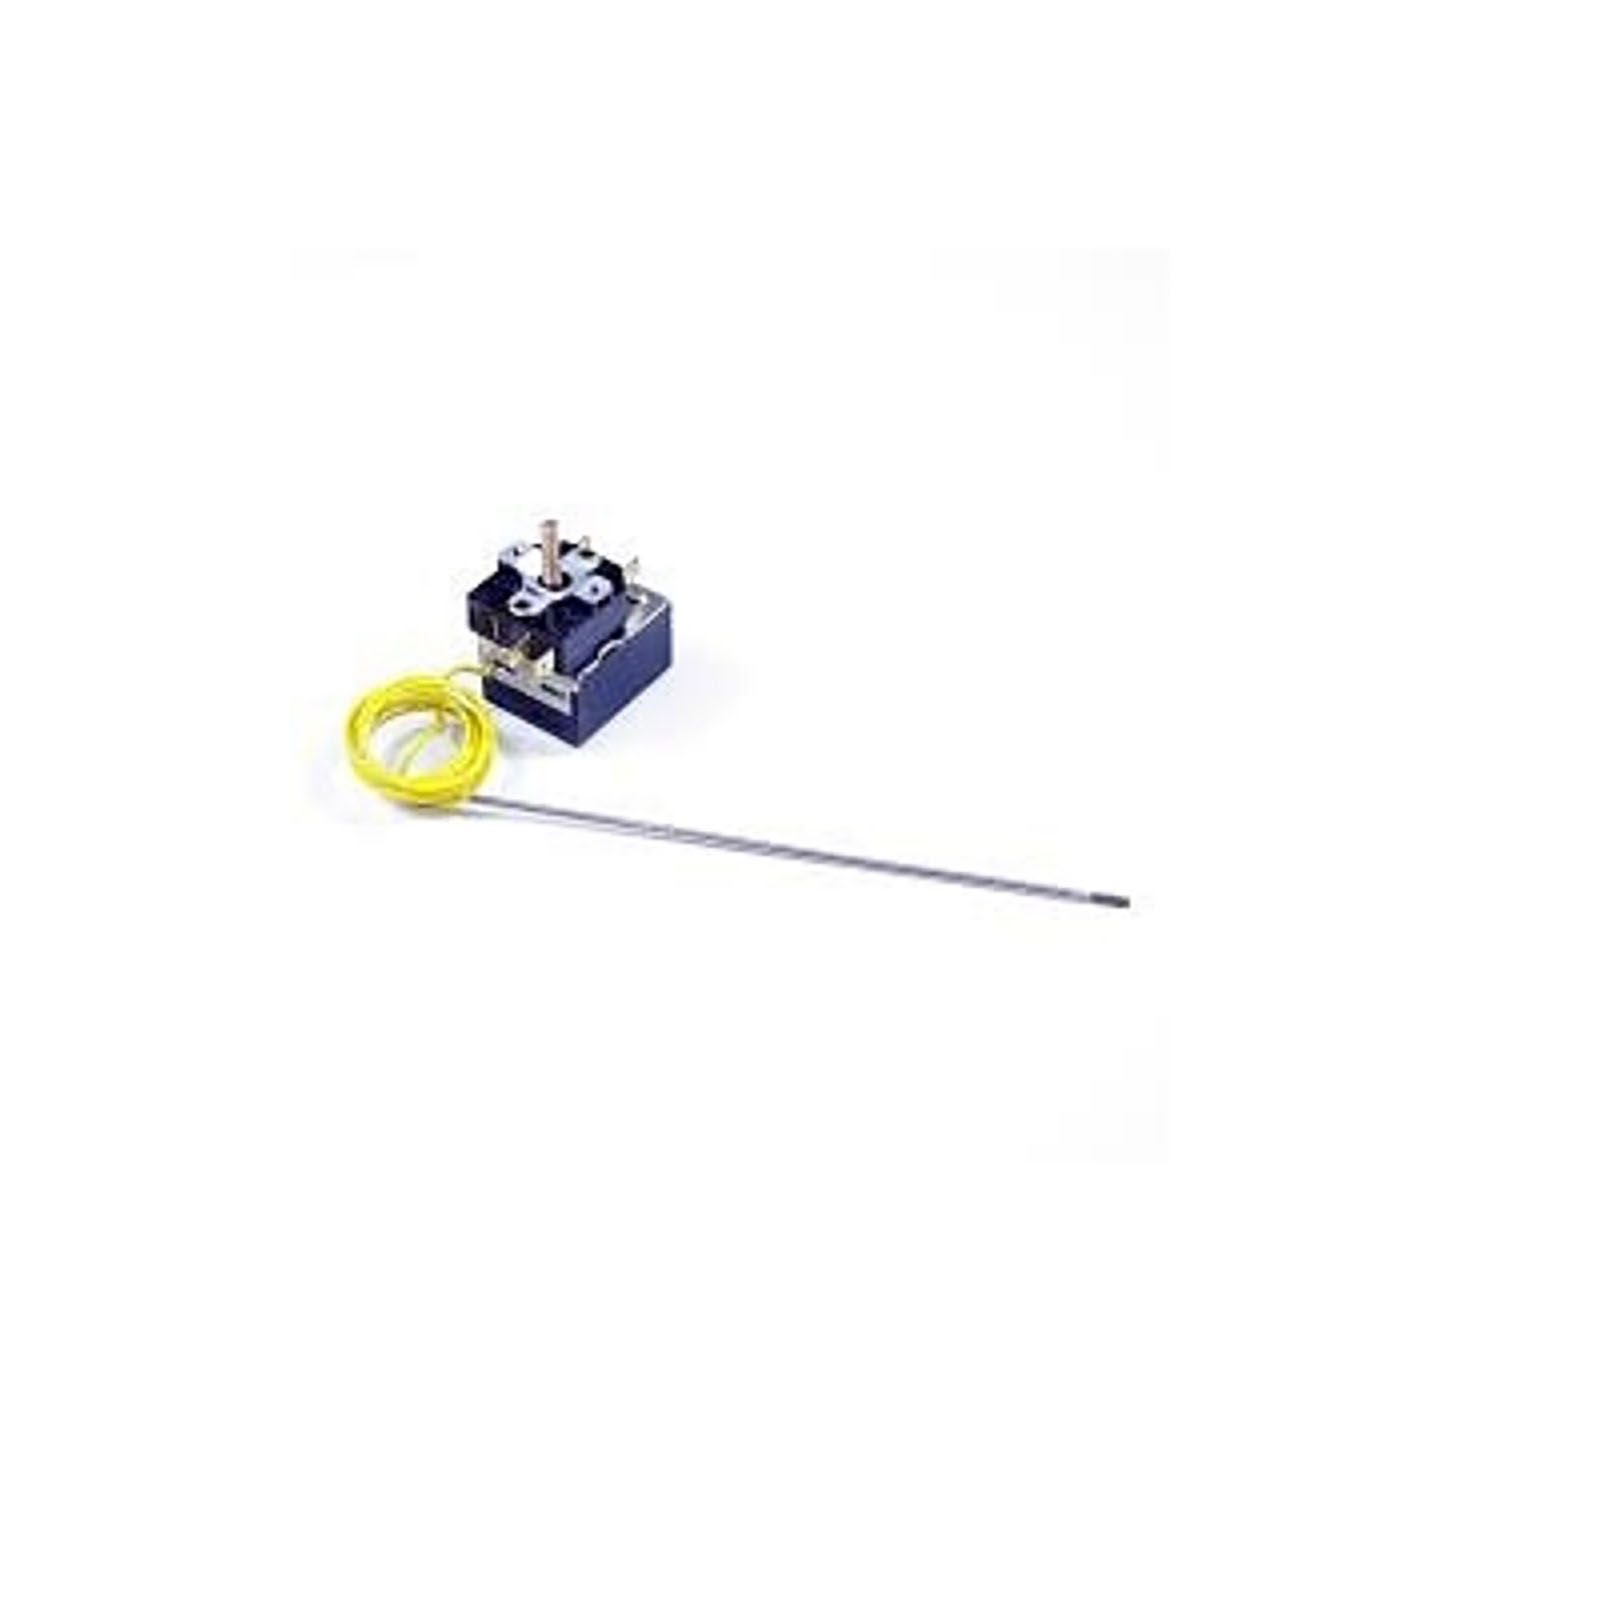 EDGEWATER PARTS WB20K10010 Electric Oven Thermostat